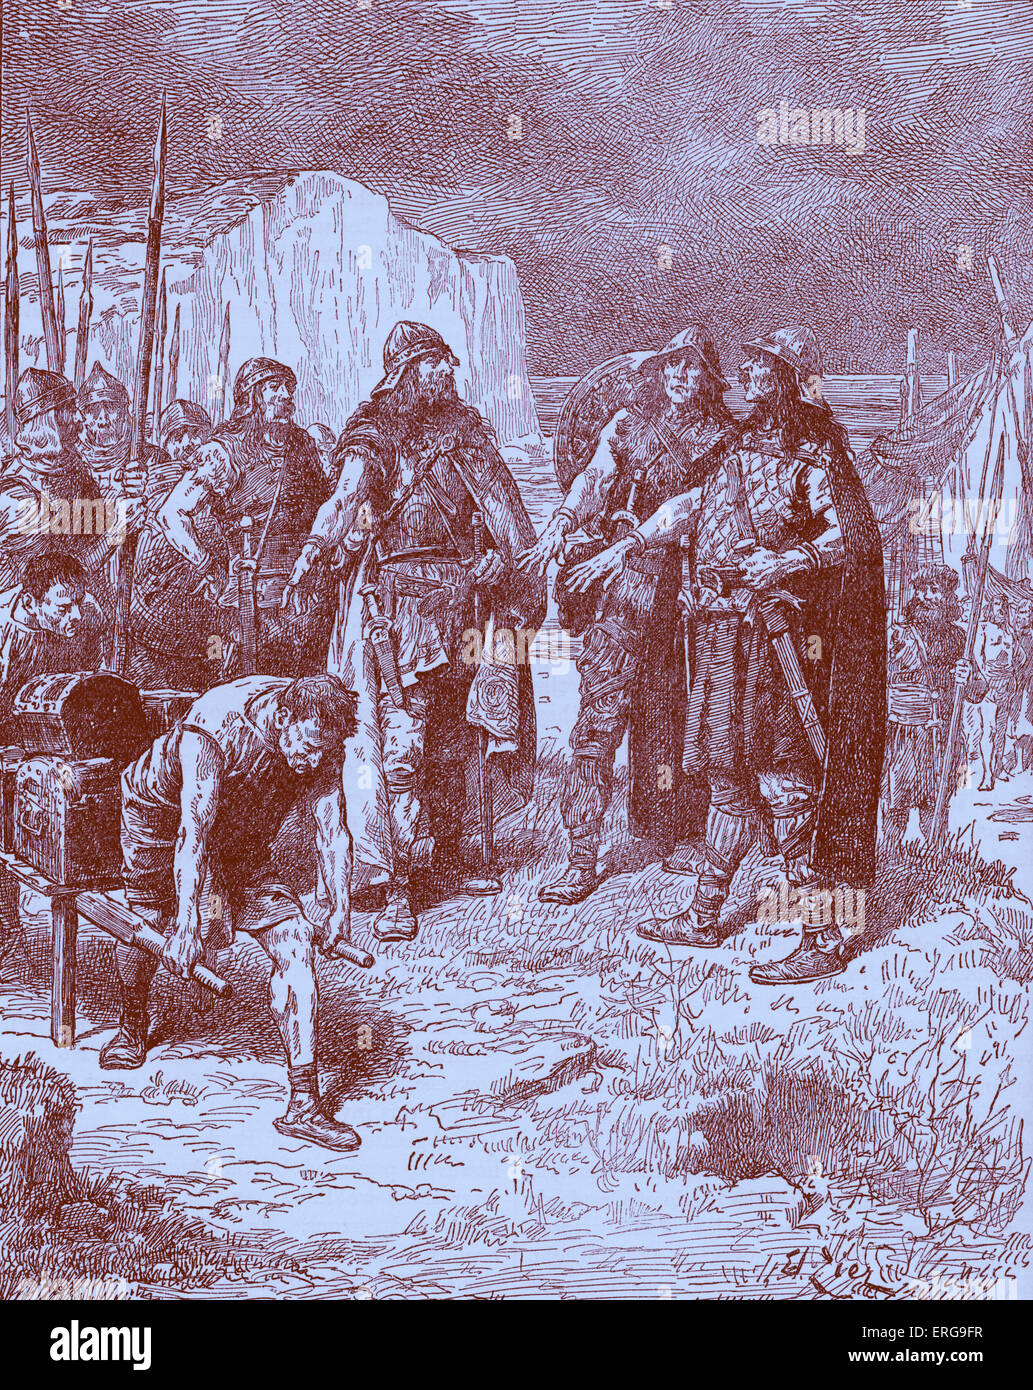 Hengist and Horsa 's treaty with Vortigern, King of the Britons. Subject of English legend of two Germanic brothers who led the Angle, Saxon, and Jutish armies that conquered the first territories of Great Britain in 5th century AD. Early 20th century illustration. Stock Photo